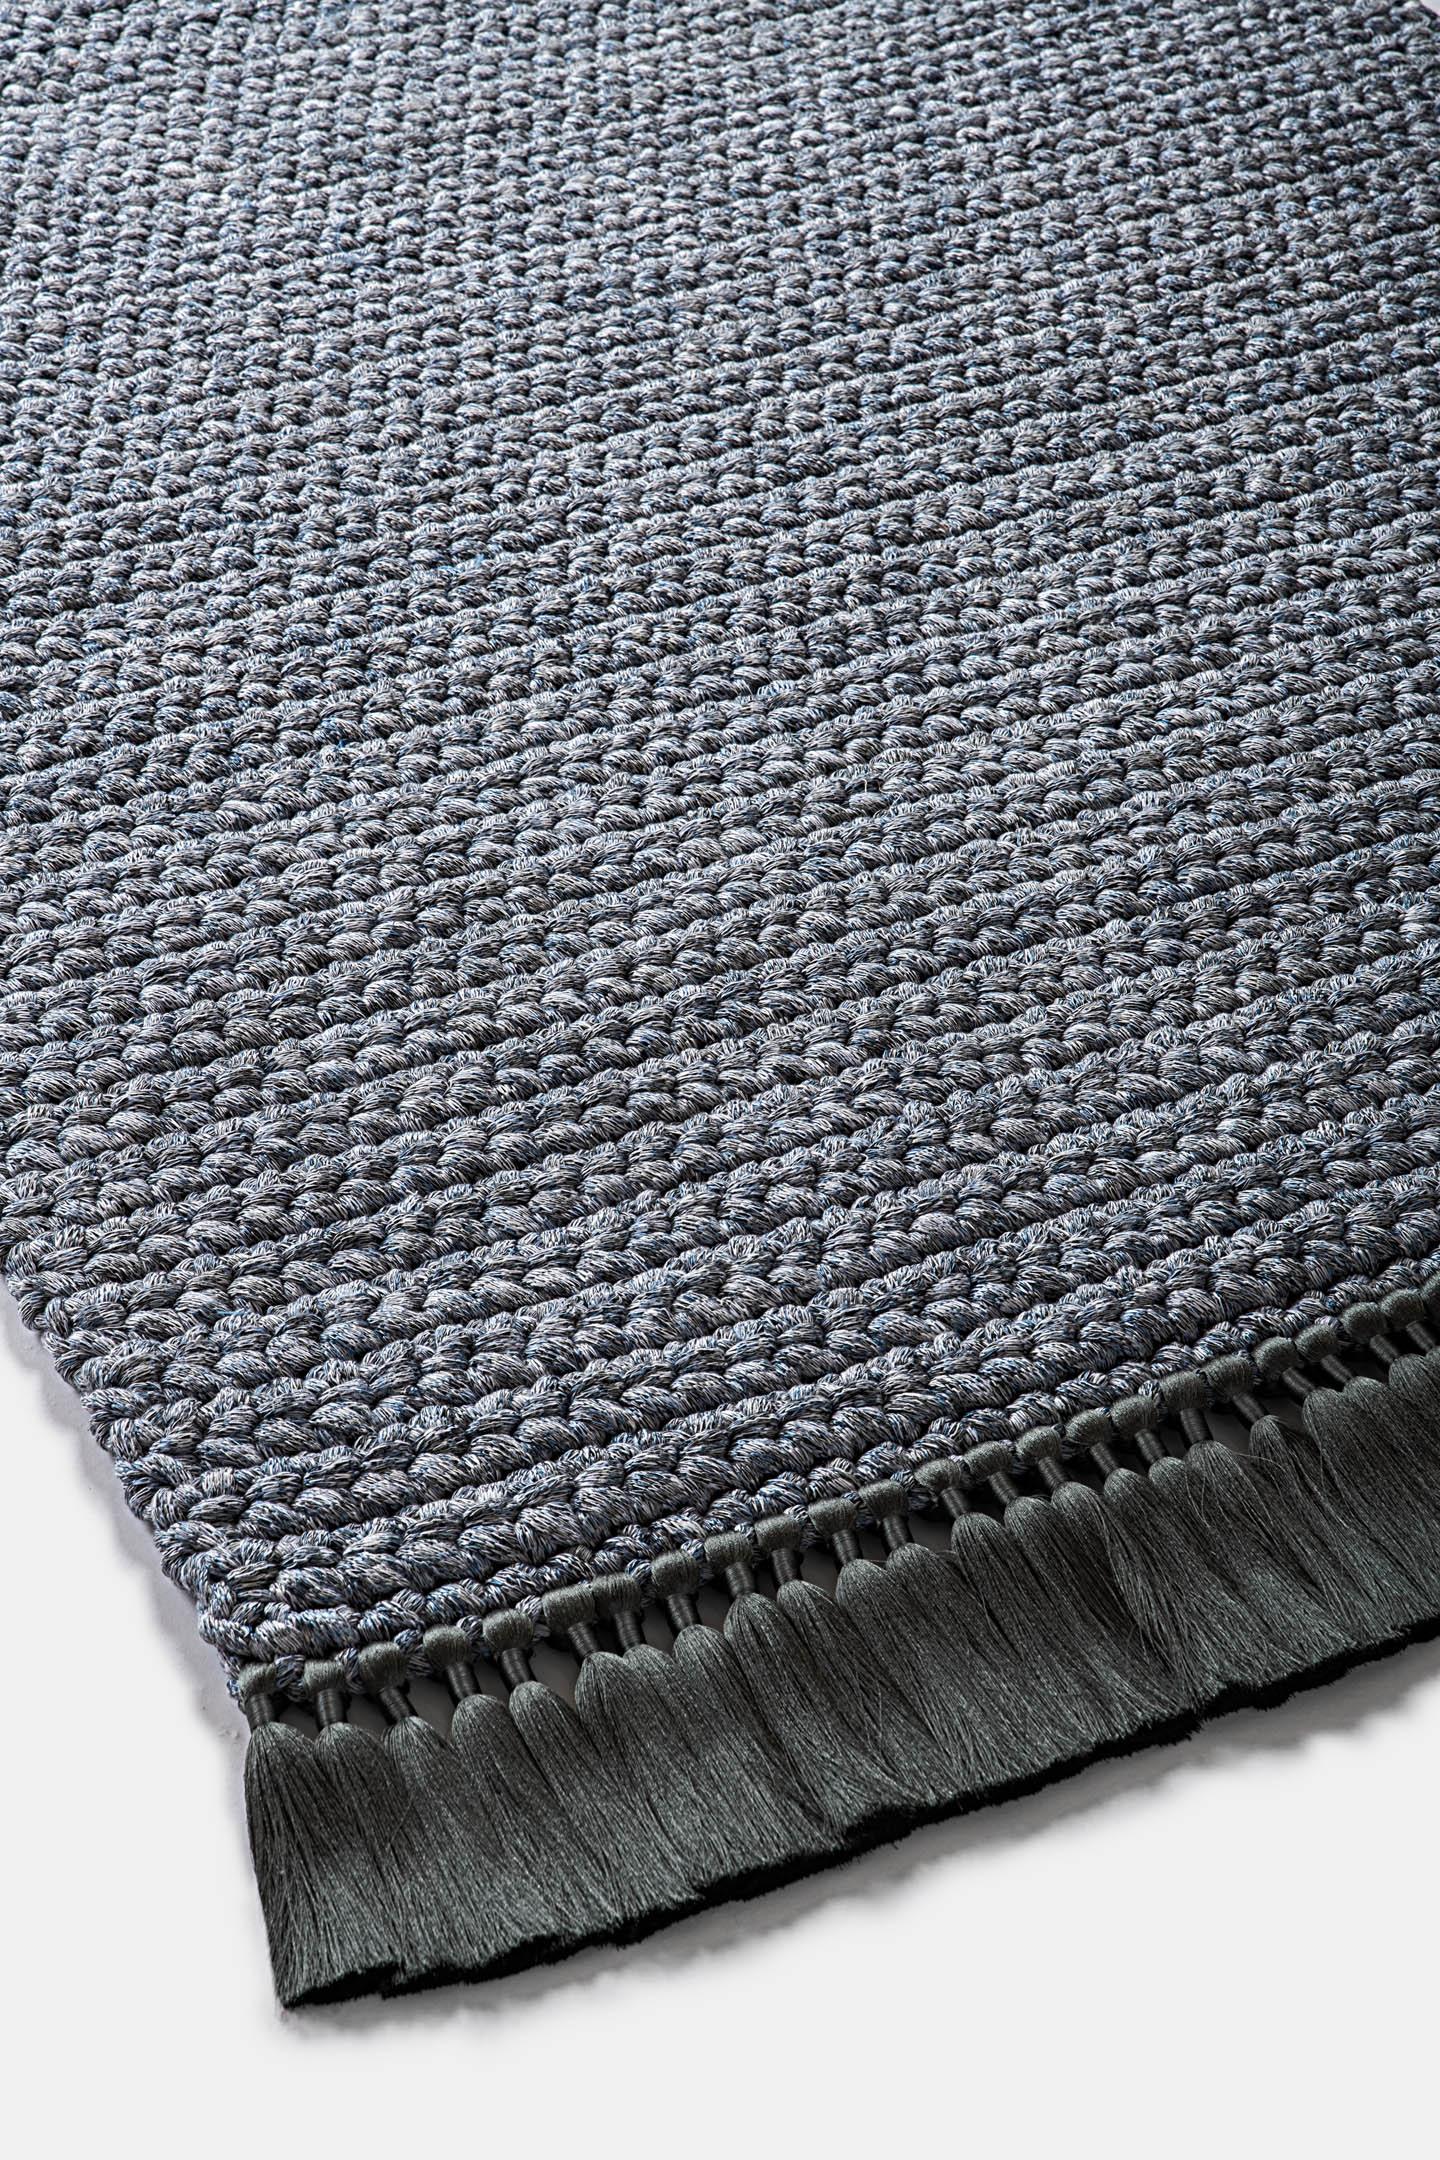 Handmade Crochet Thick rug in Blue Grey made of Cotton & Polyester by iota 1